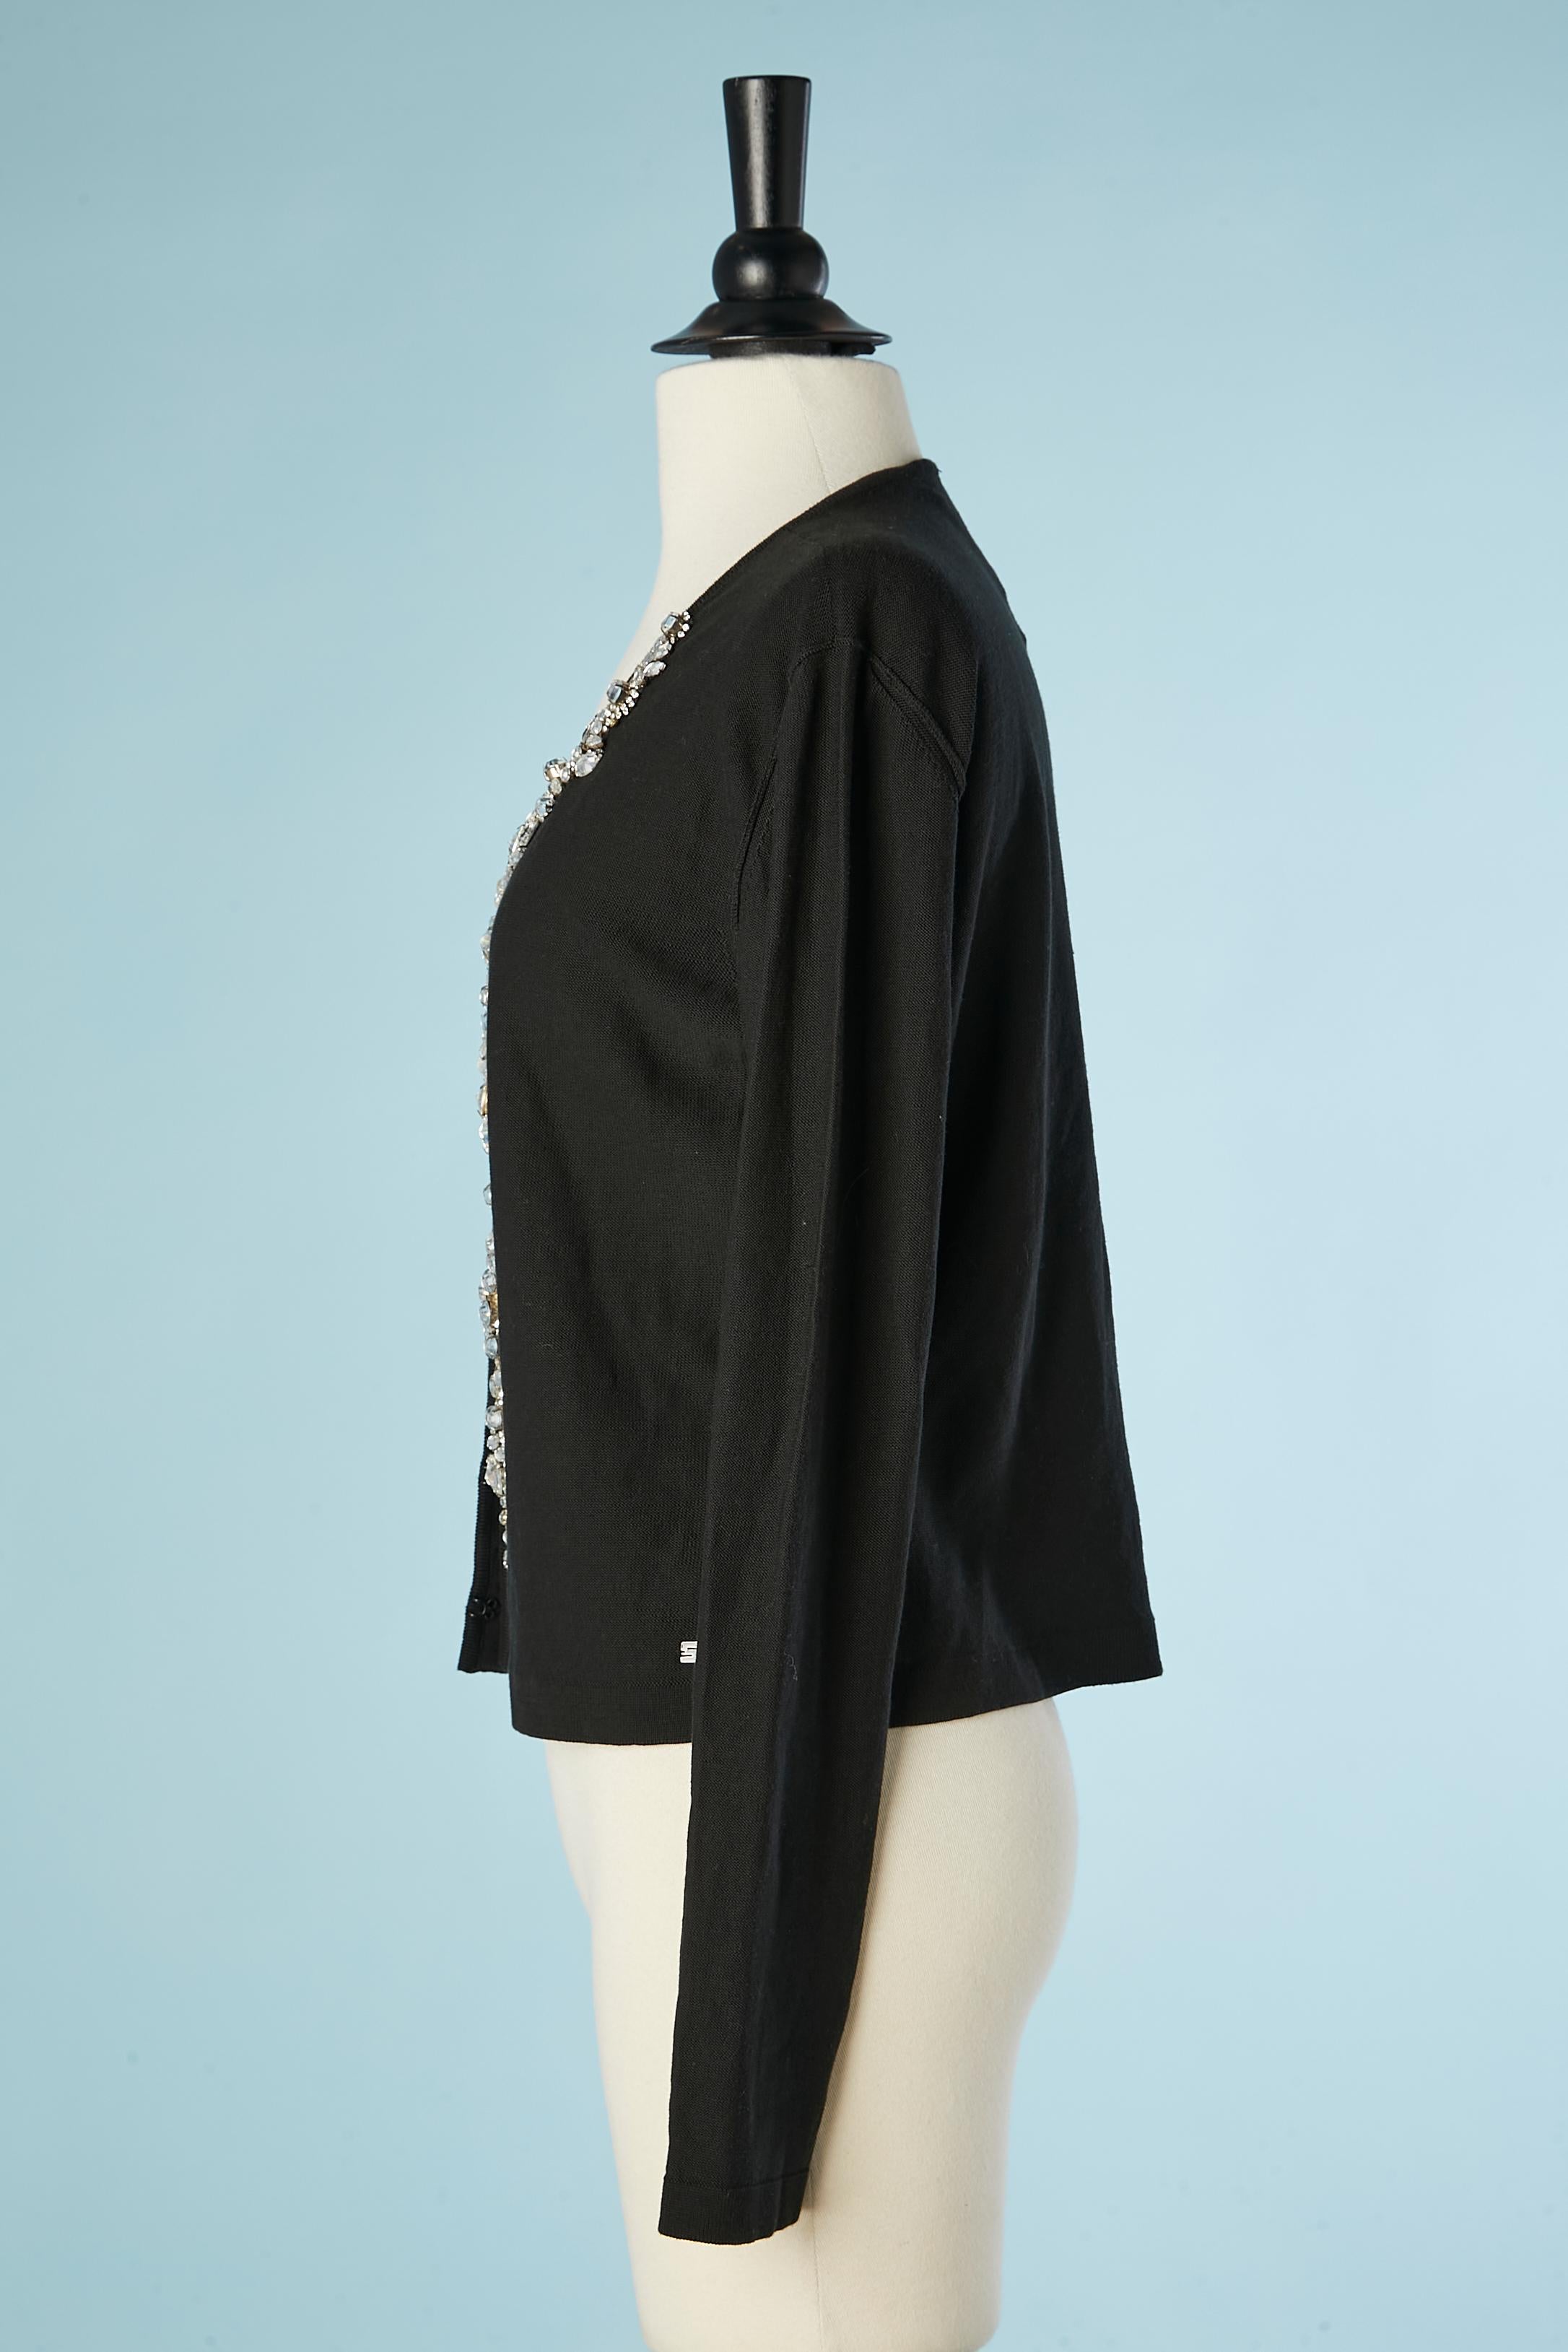 Black cotton knit evening cardigan with rhinestone embellishment Sonia Rykiell  In Excellent Condition For Sale In Saint-Ouen-Sur-Seine, FR